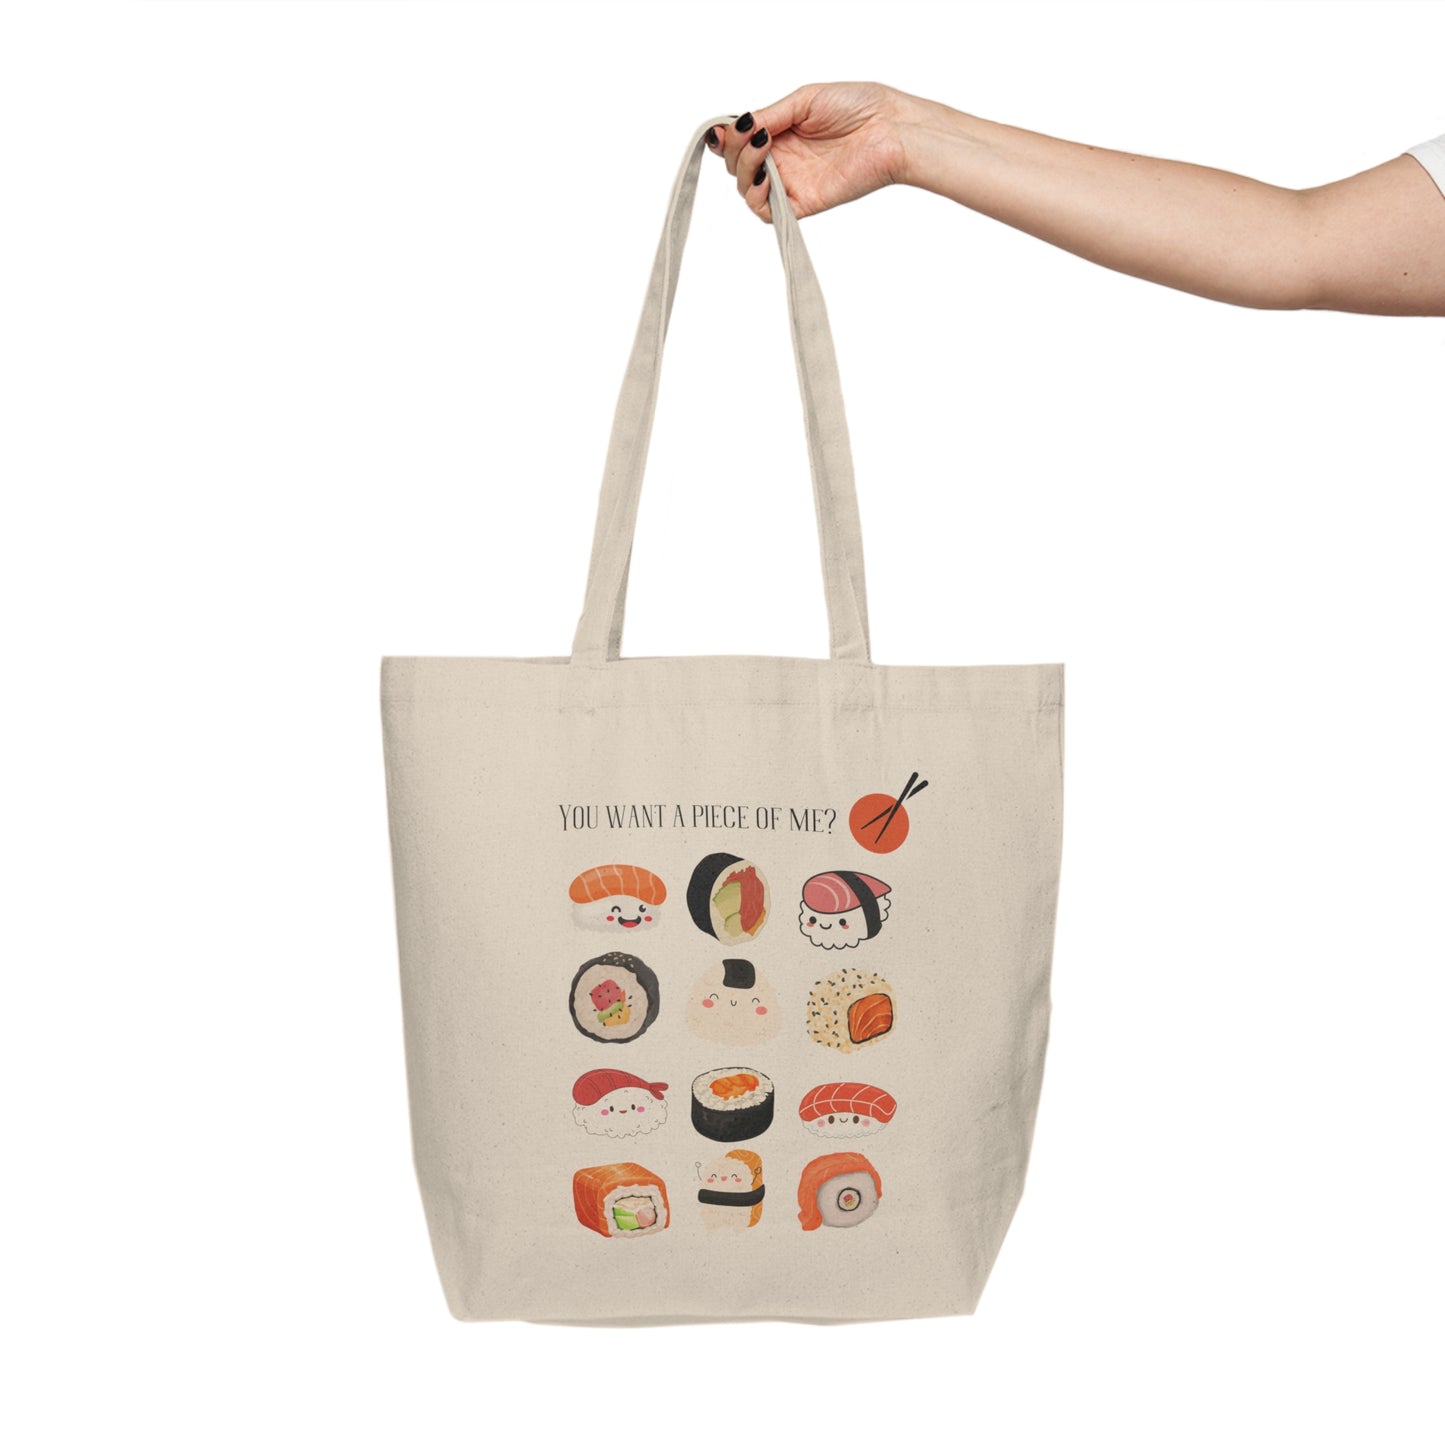 YOU WANT A PIECE OF ME? TOTE BAG